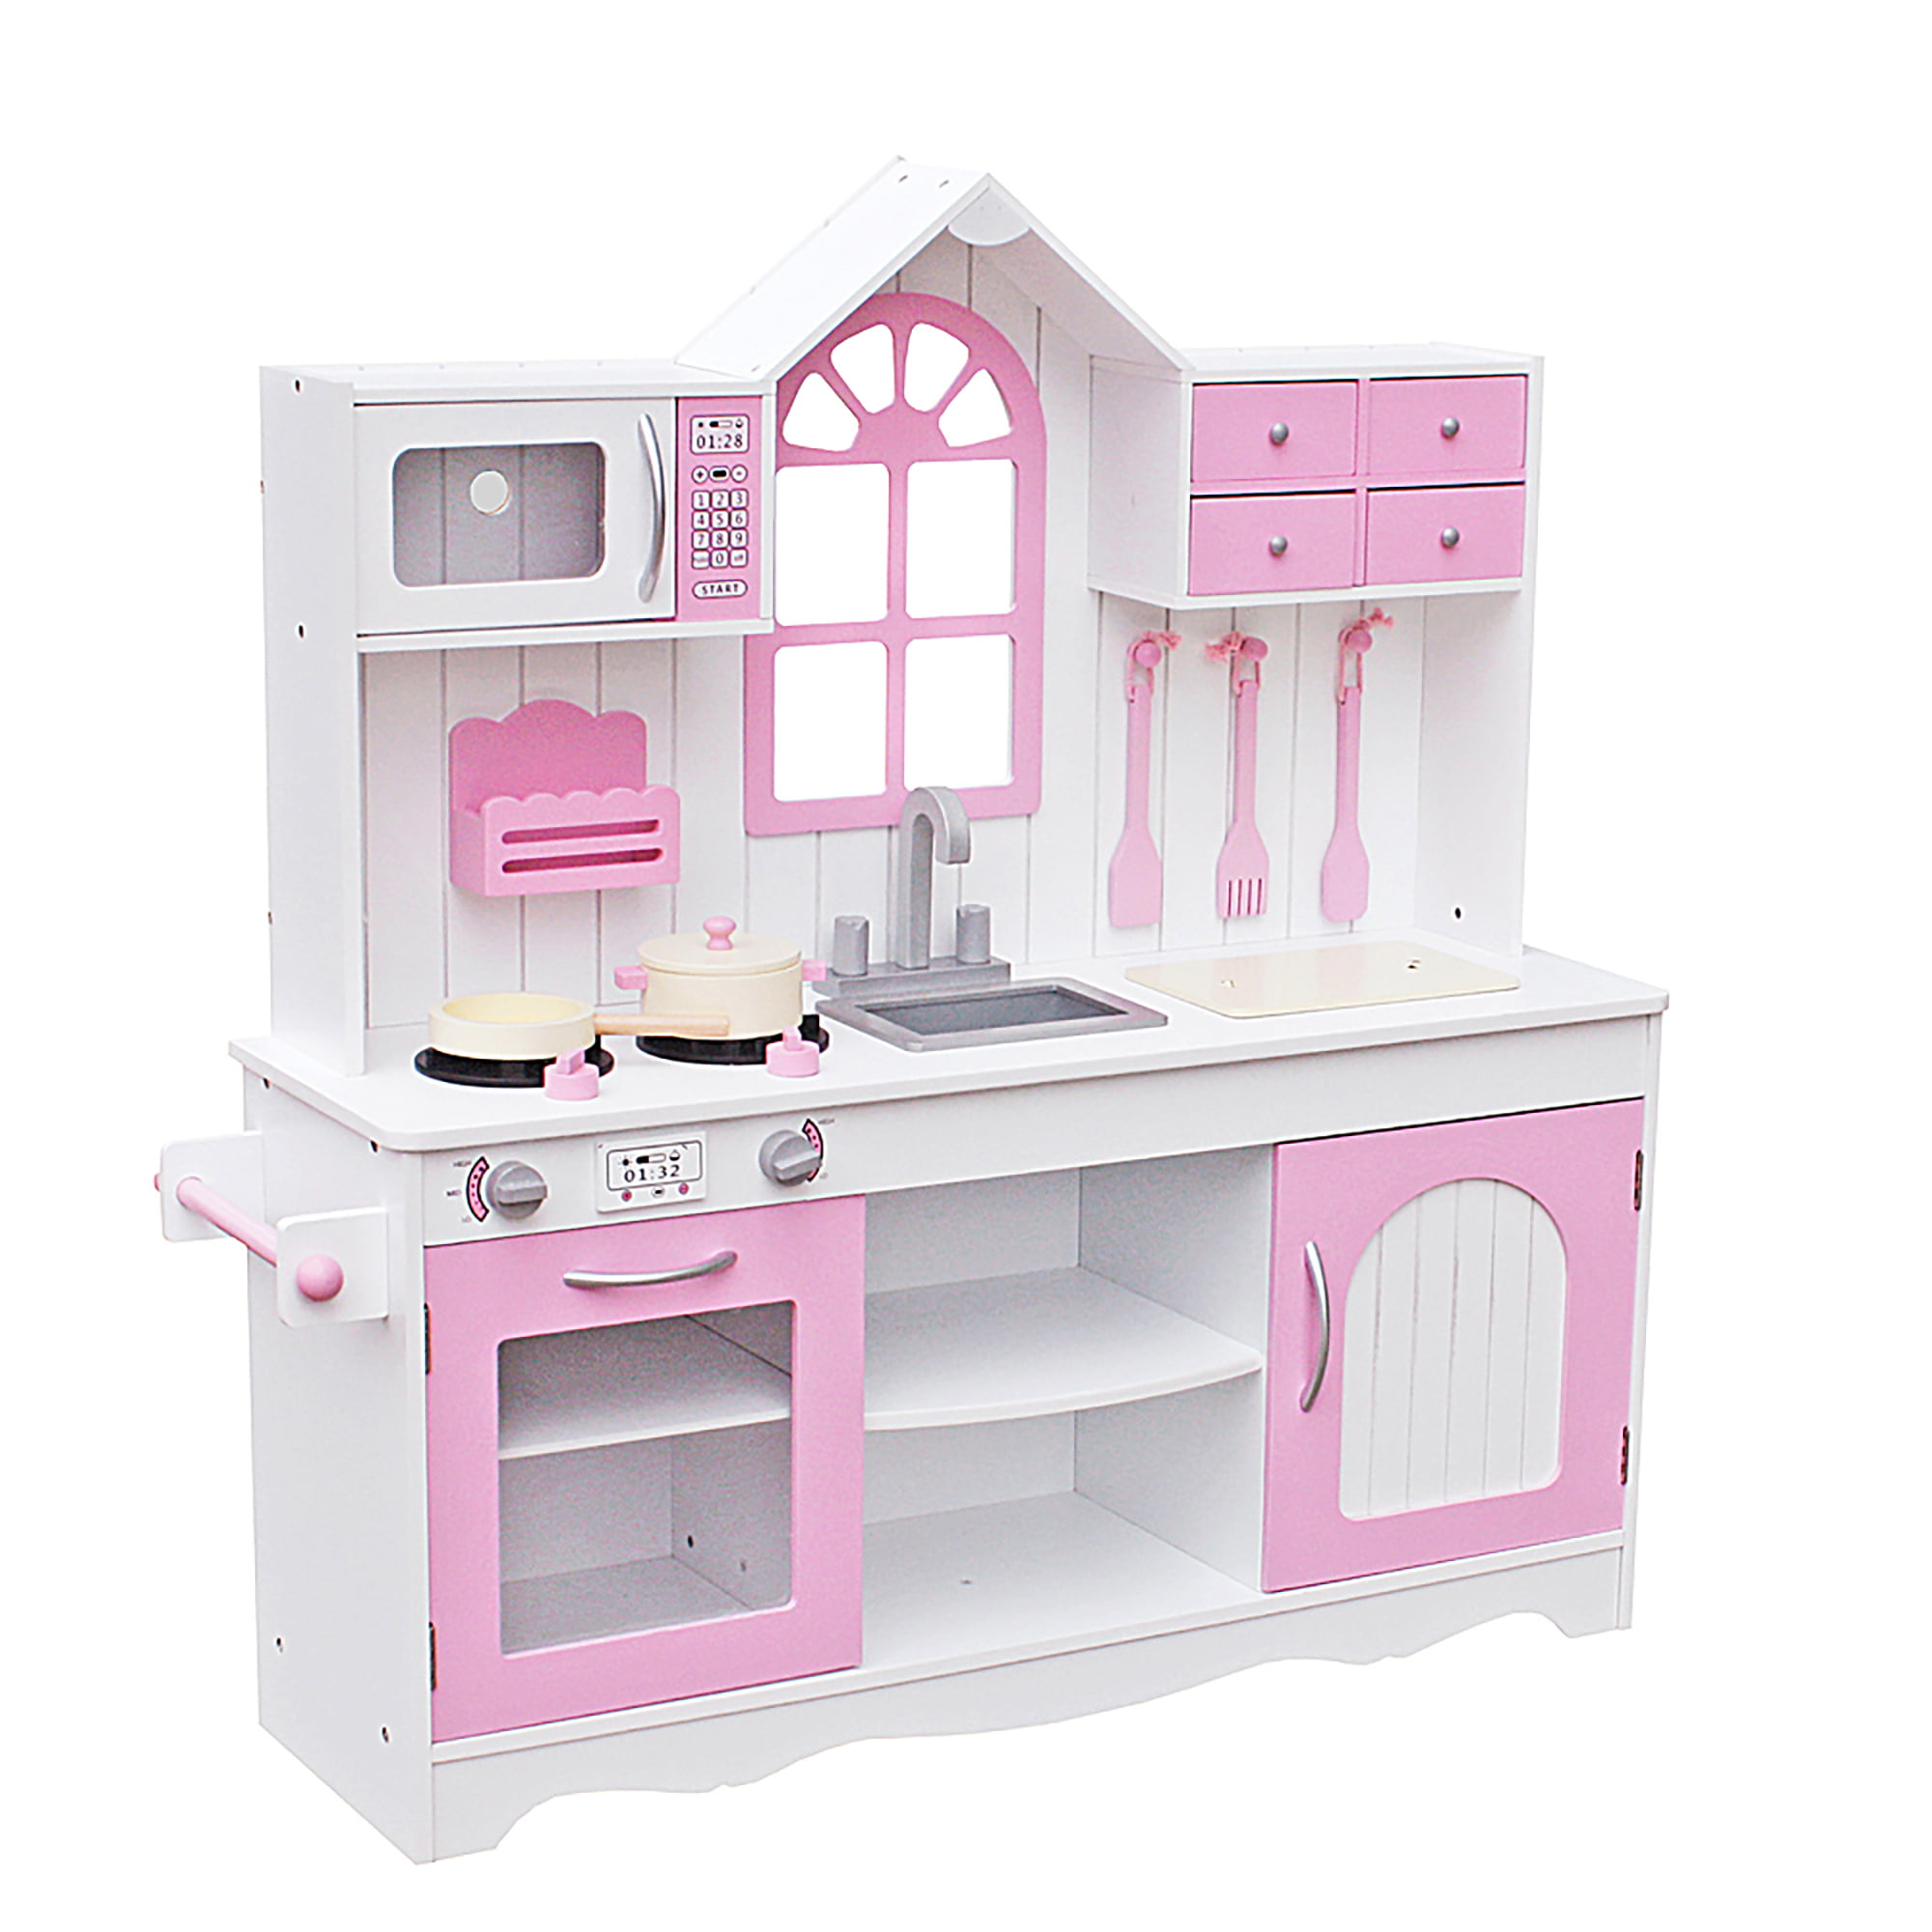 Wholesale Wooden Montessori Modern Baby Kitchen Ware Play House Pink Little  Cute kitchen toys From m.